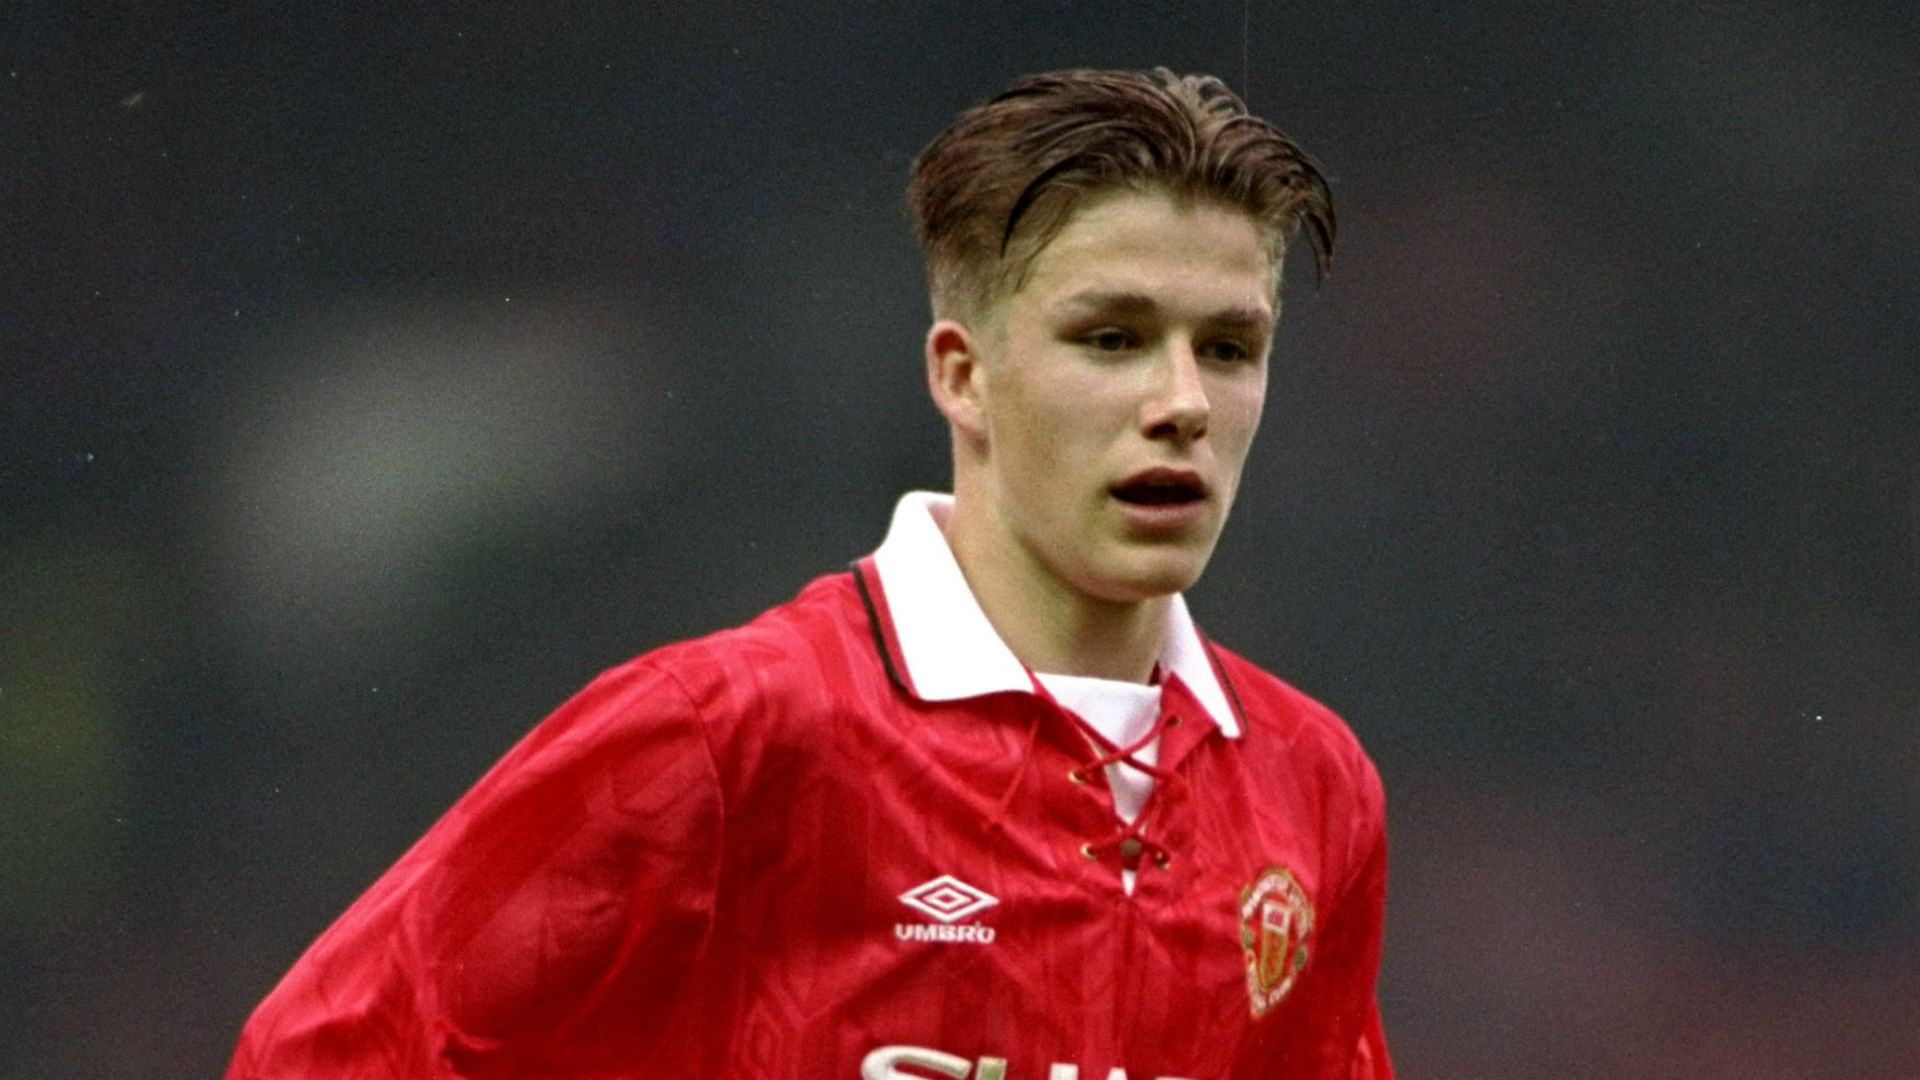 David Beckham's debut for Manchester United - Who were his teammates and where are they now?